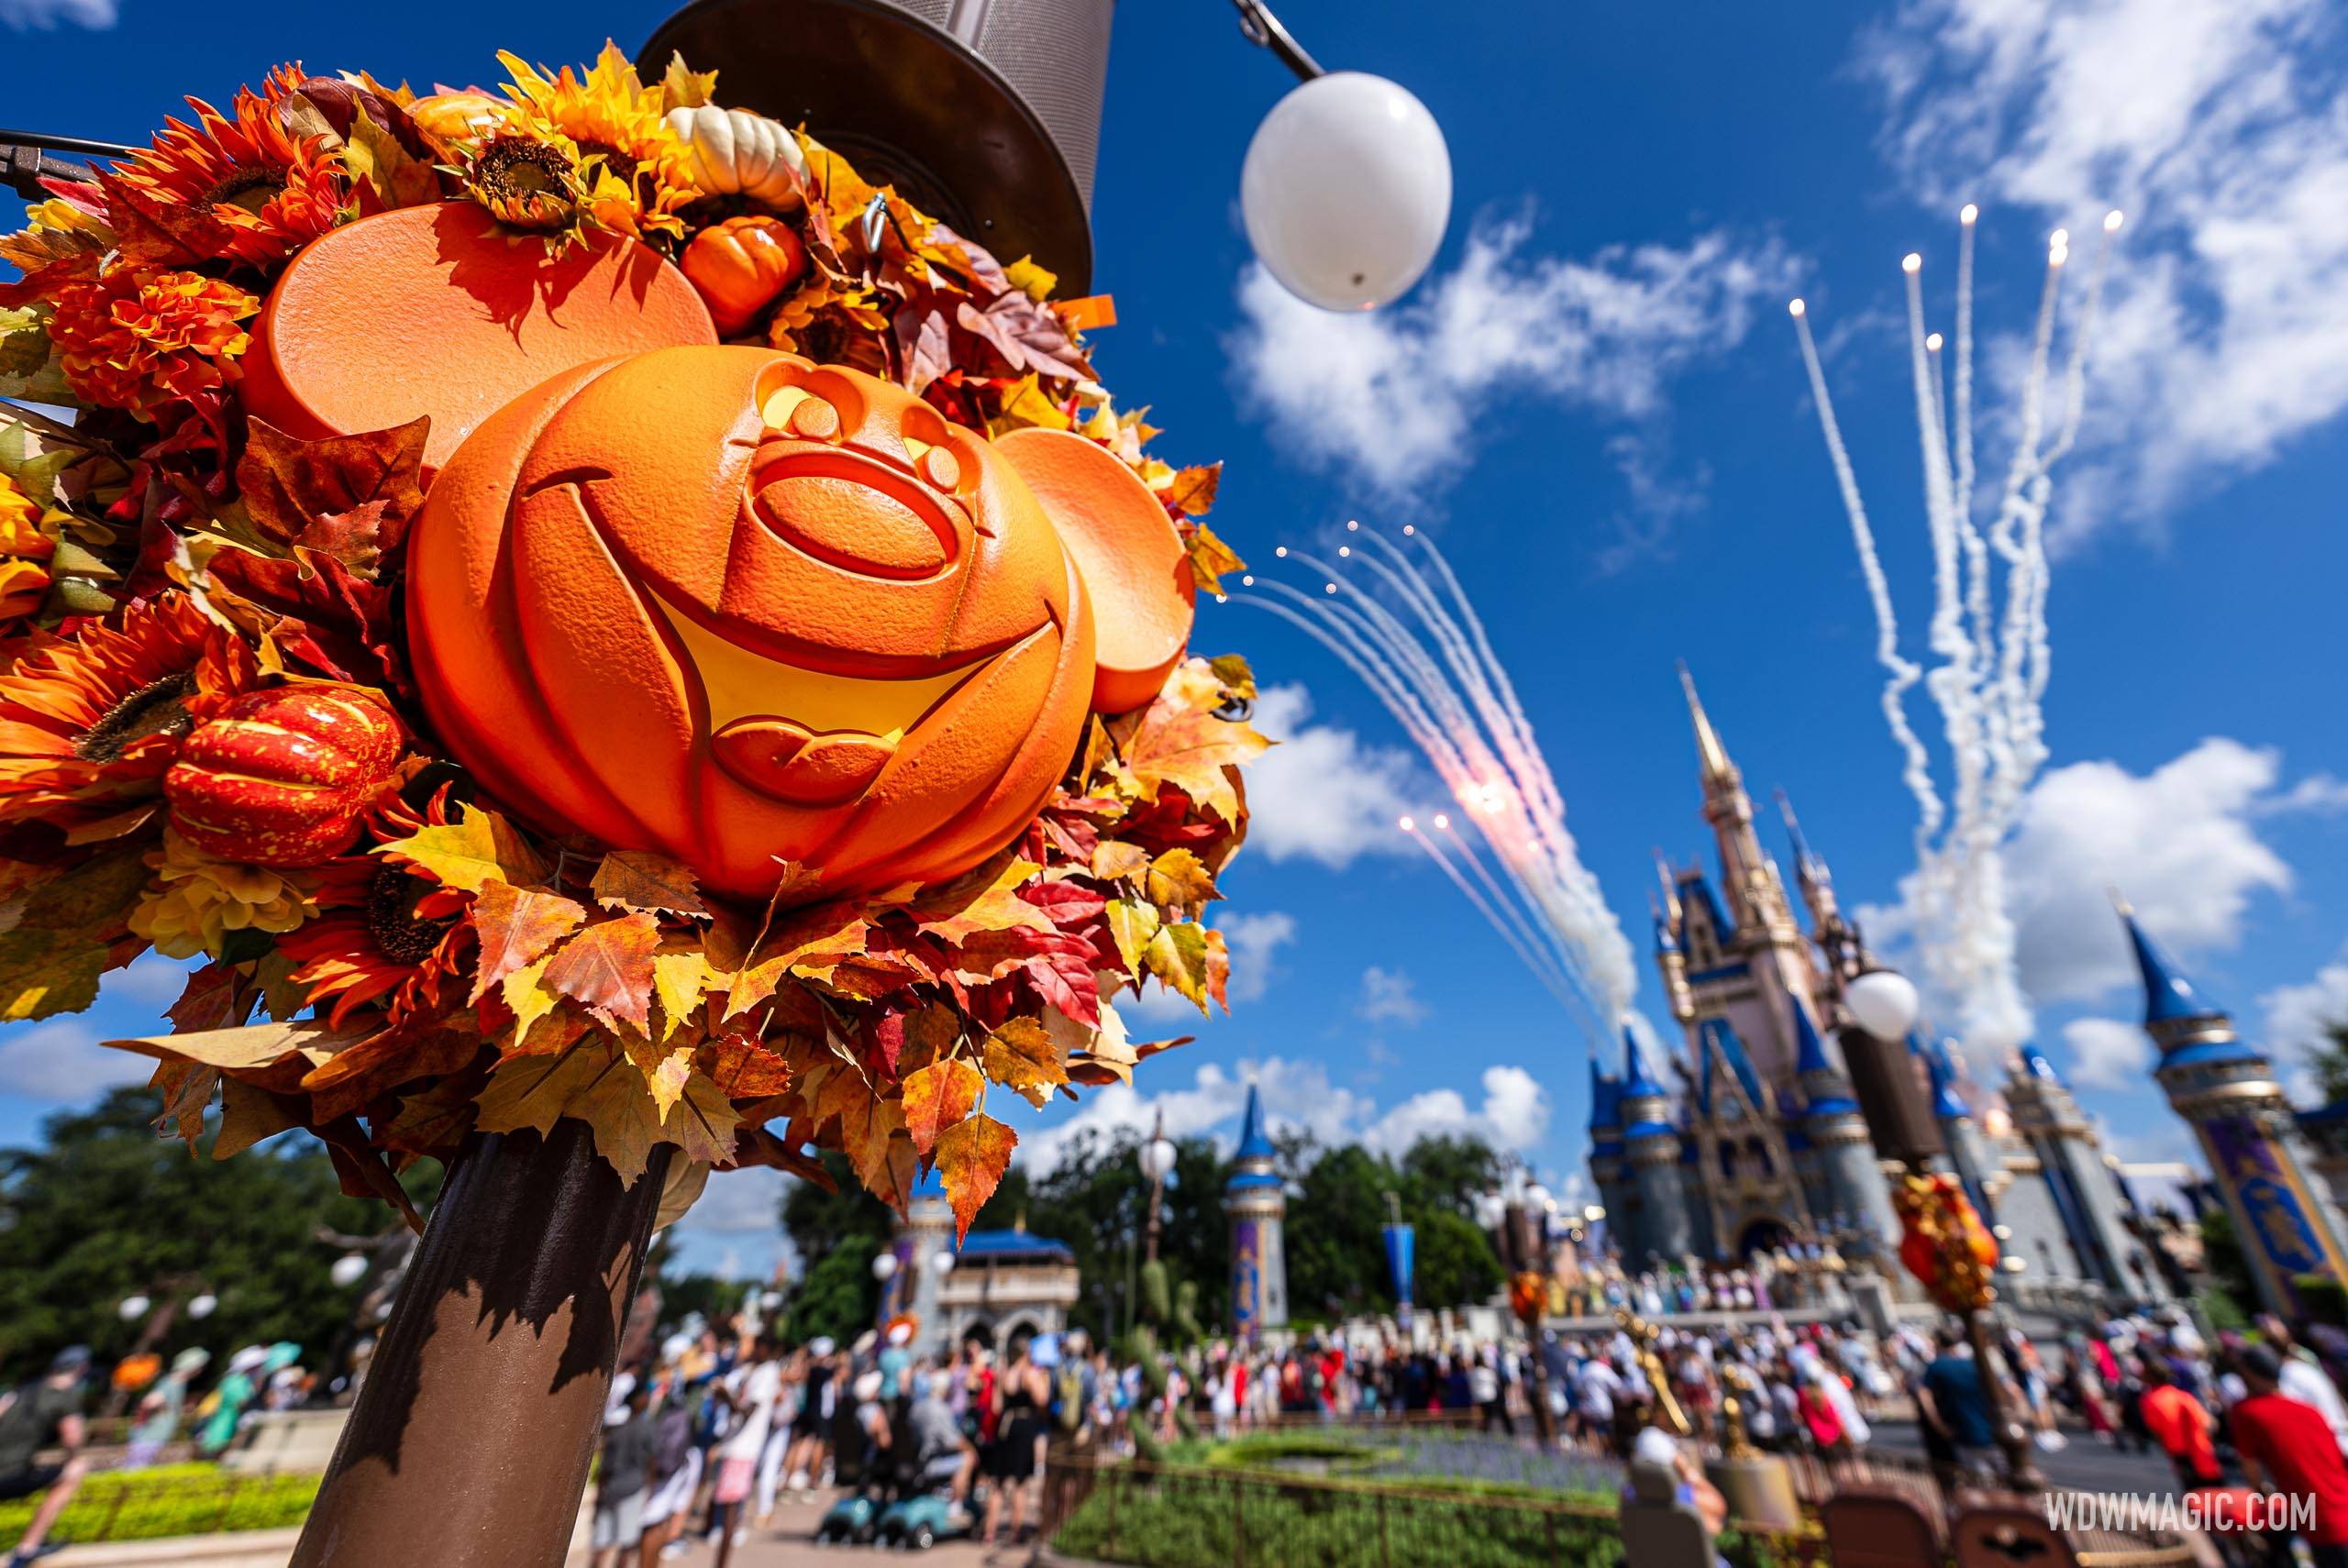 Strong sales of Mickey's Not-So-Scary Halloween Party tickets continues - another September date is sold out